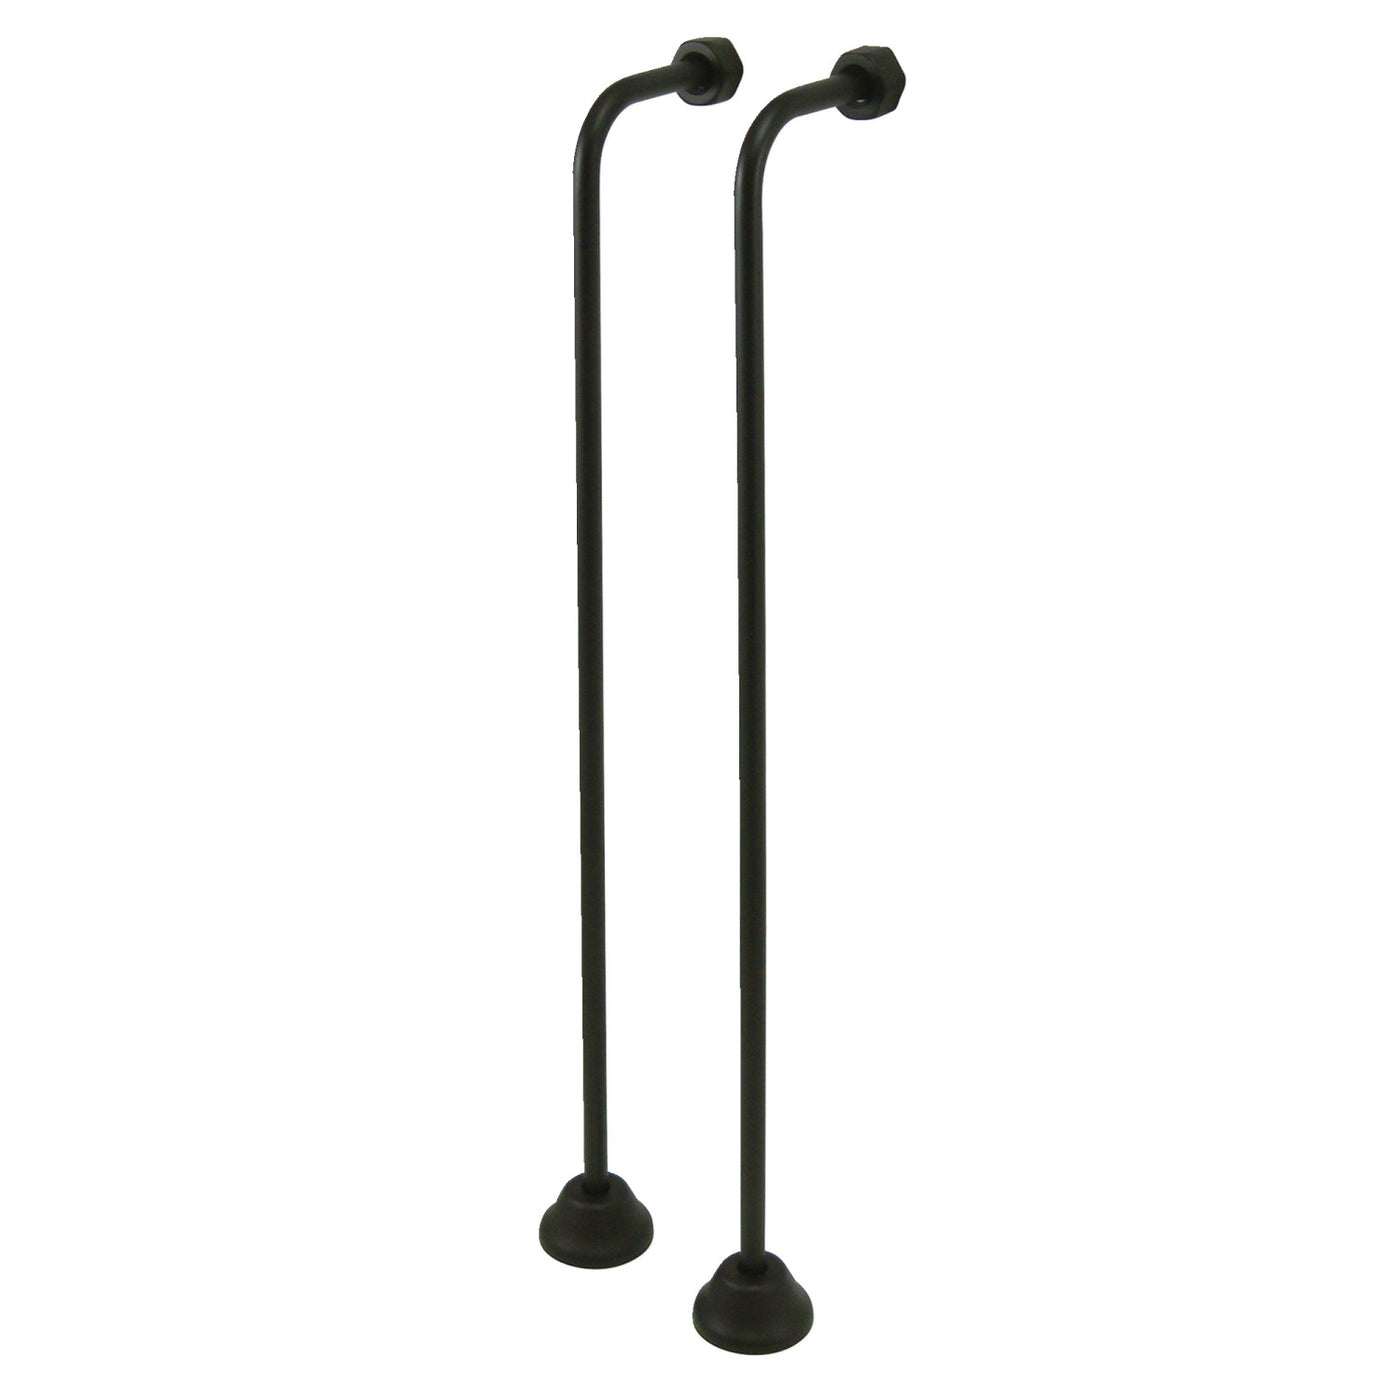 Elements of Design DS465 Single Offset Bath Supply, Oil Rubbed Bronze